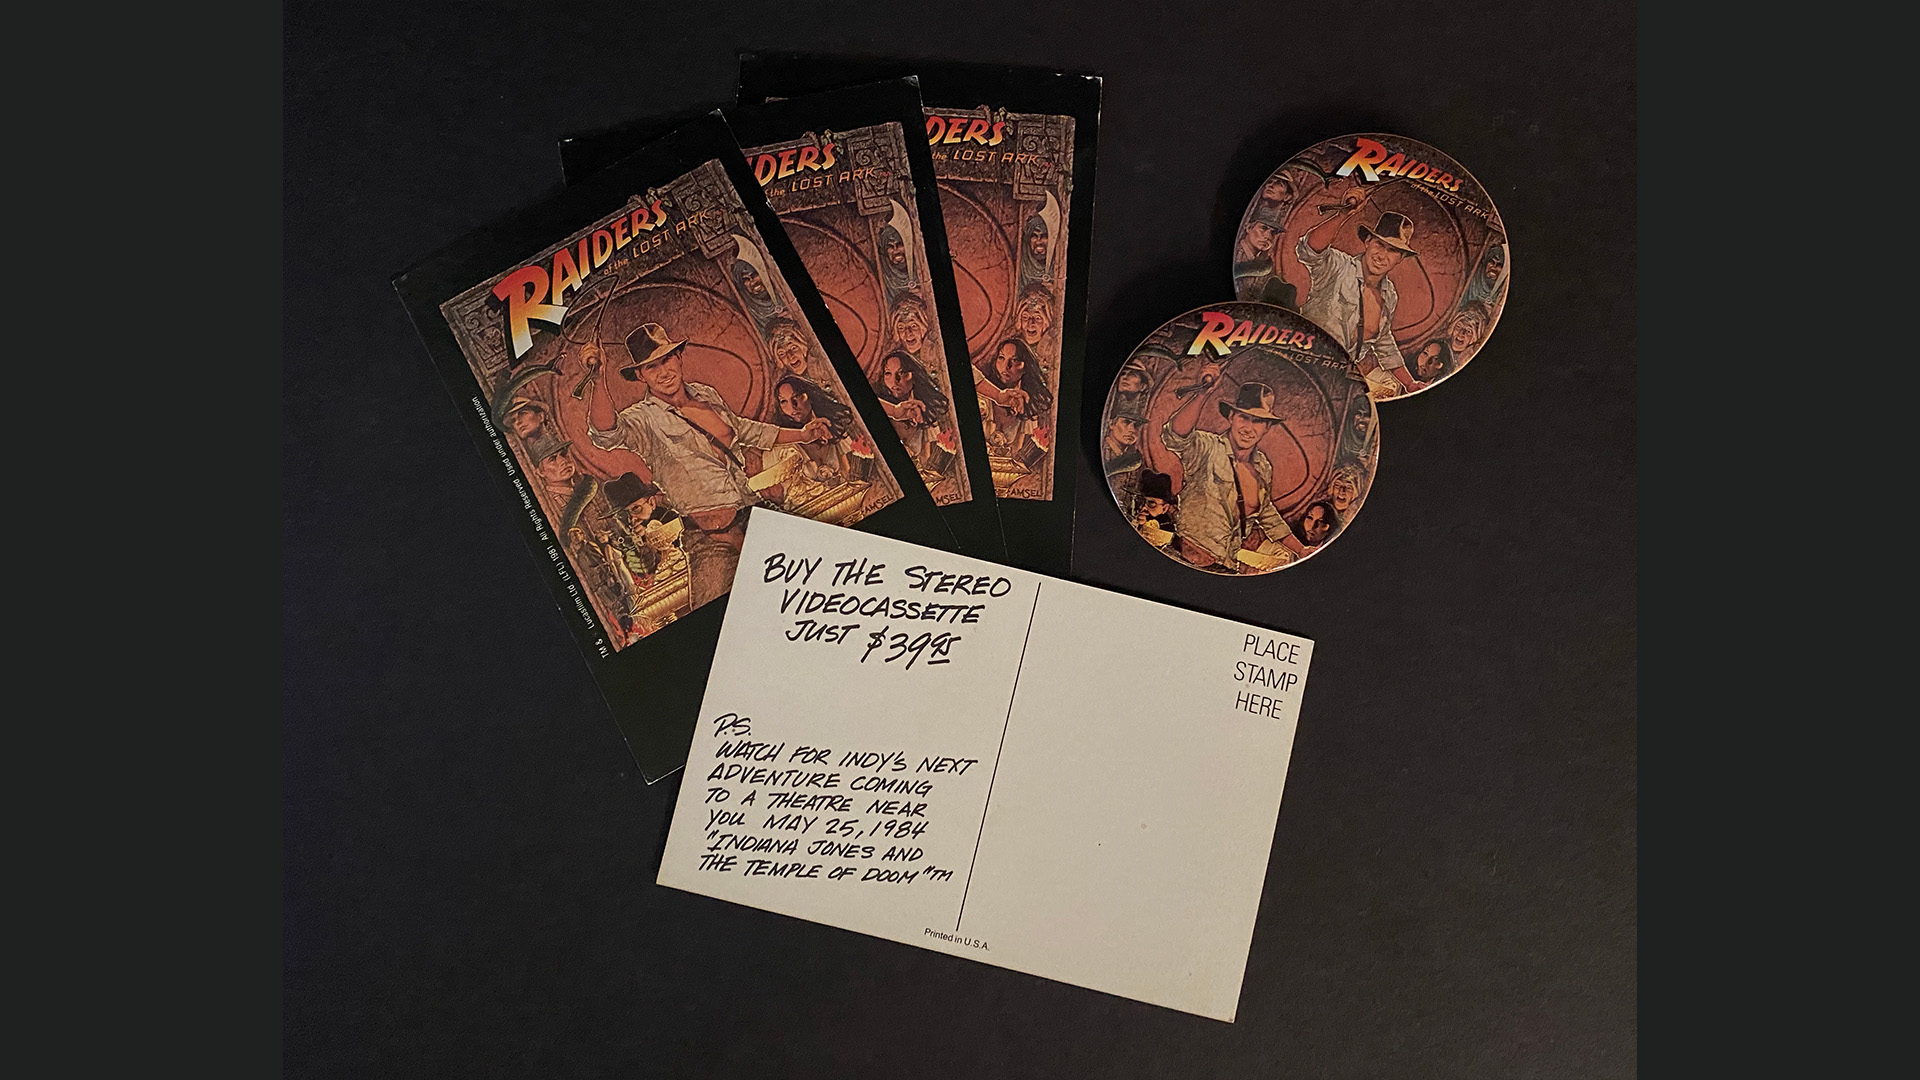 Raiders of the Lost Ark postcards and buttons